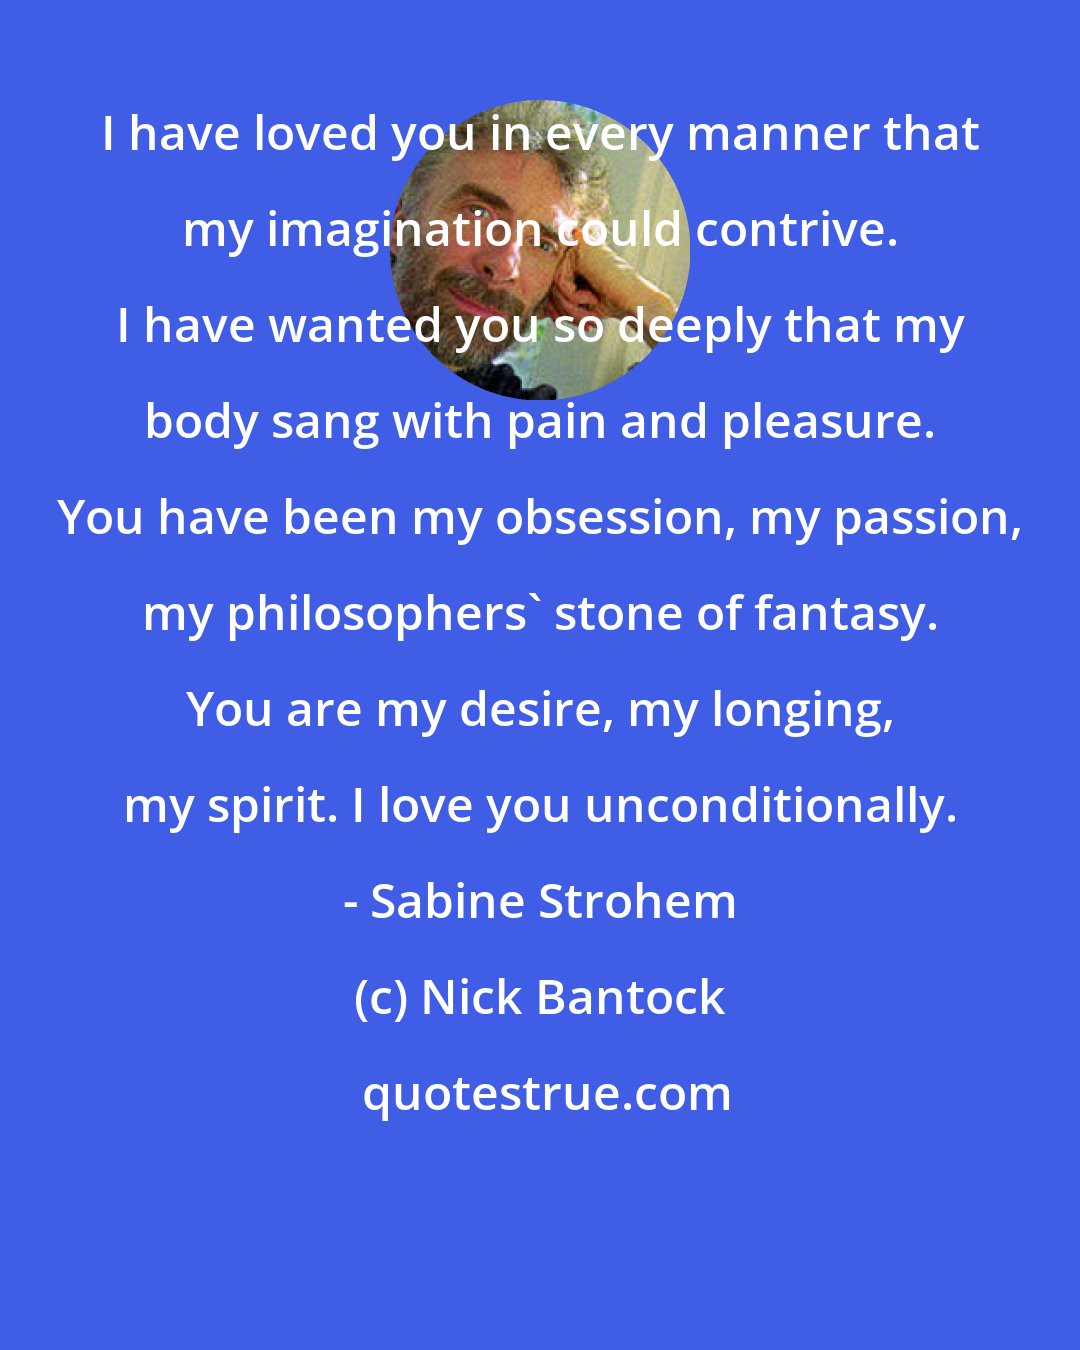 Nick Bantock: I have loved you in every manner that my imagination could contrive. I have wanted you so deeply that my body sang with pain and pleasure. You have been my obsession, my passion, my philosophers' stone of fantasy. You are my desire, my longing, my spirit. I love you unconditionally. - Sabine Strohem